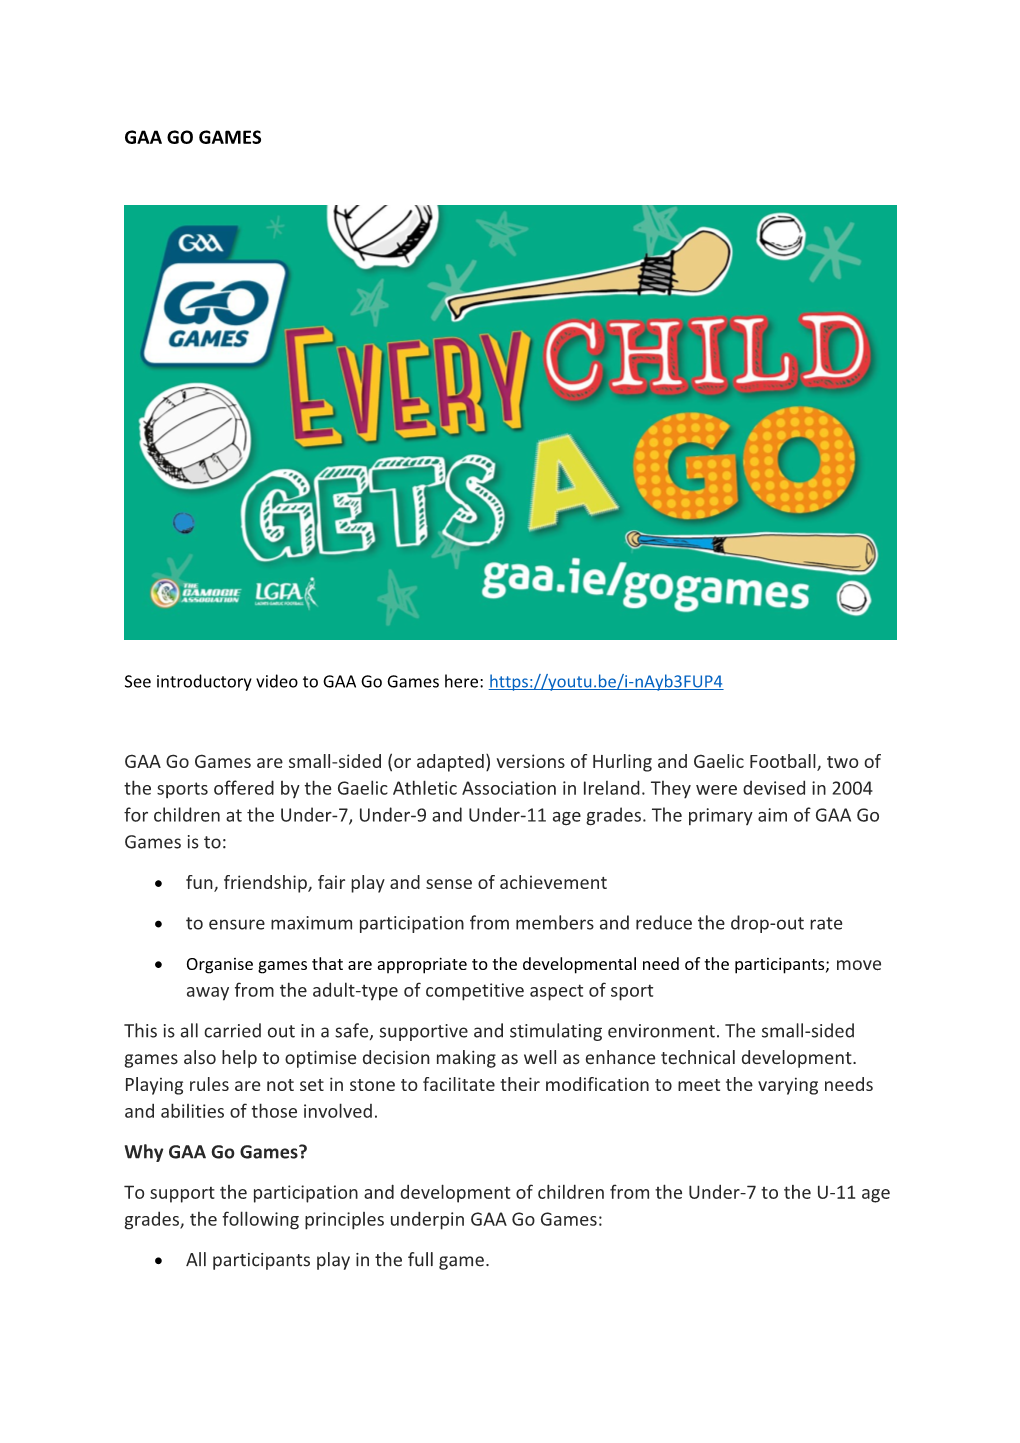 See Introductory Video to GAA Go Games Here